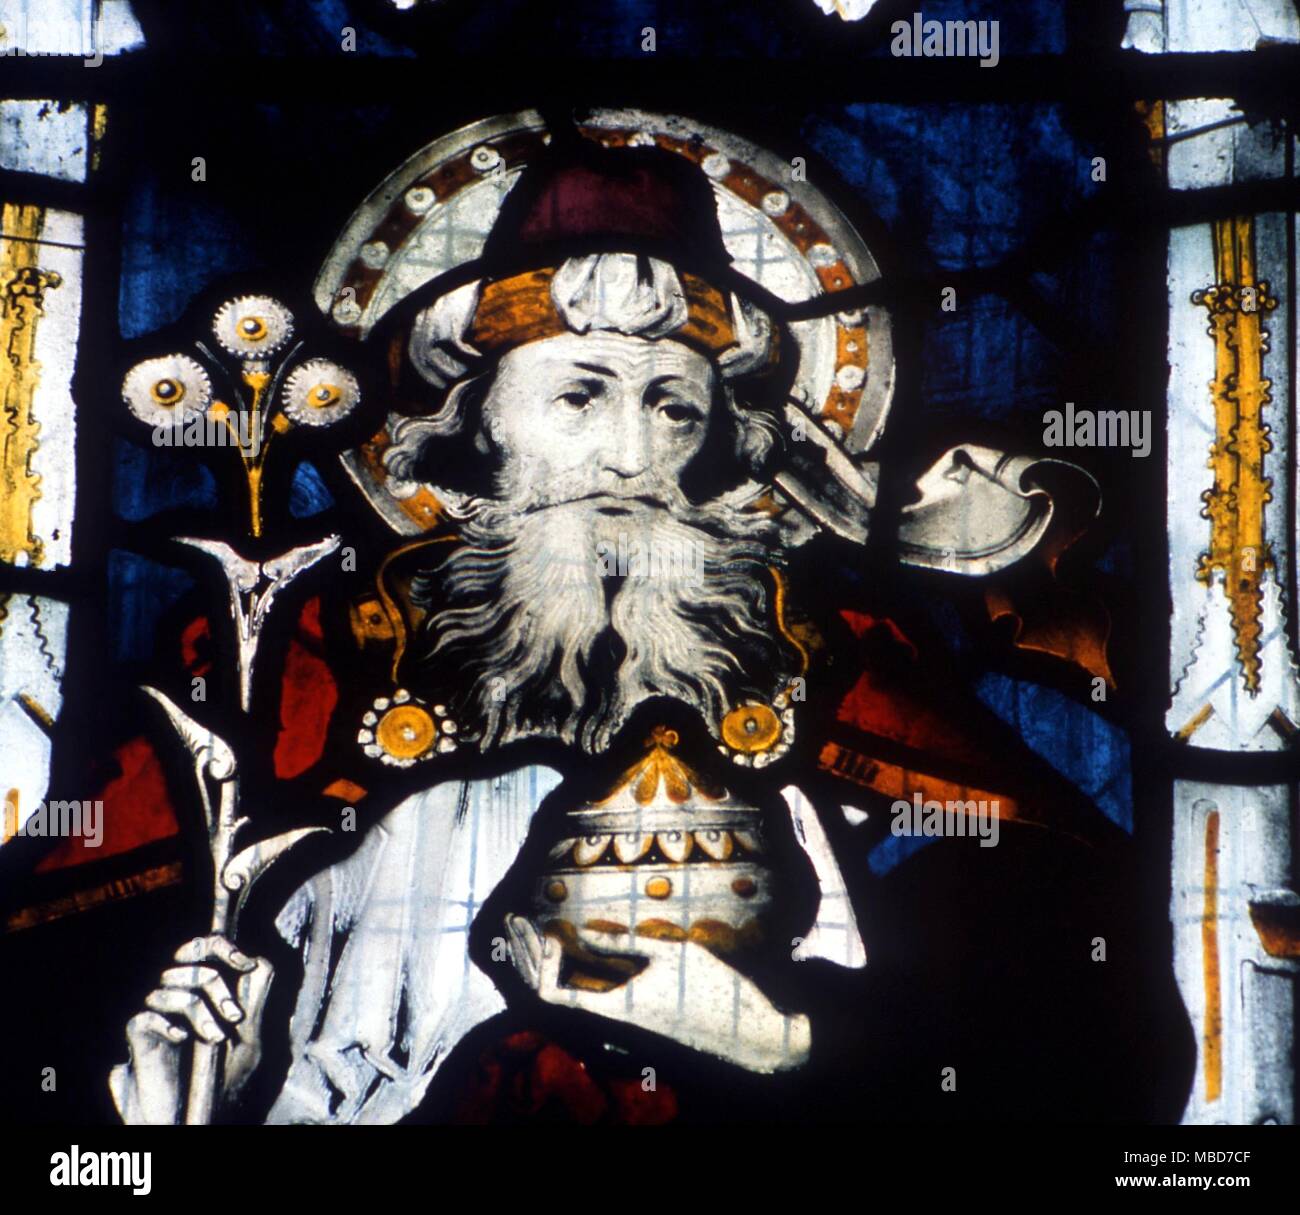 Joseph of Arimathea with the Holy Grail, and the flowering Thorn. Stained glass window in Kilkhampton church, Cornwall, Nineteenth century. Stock Photo